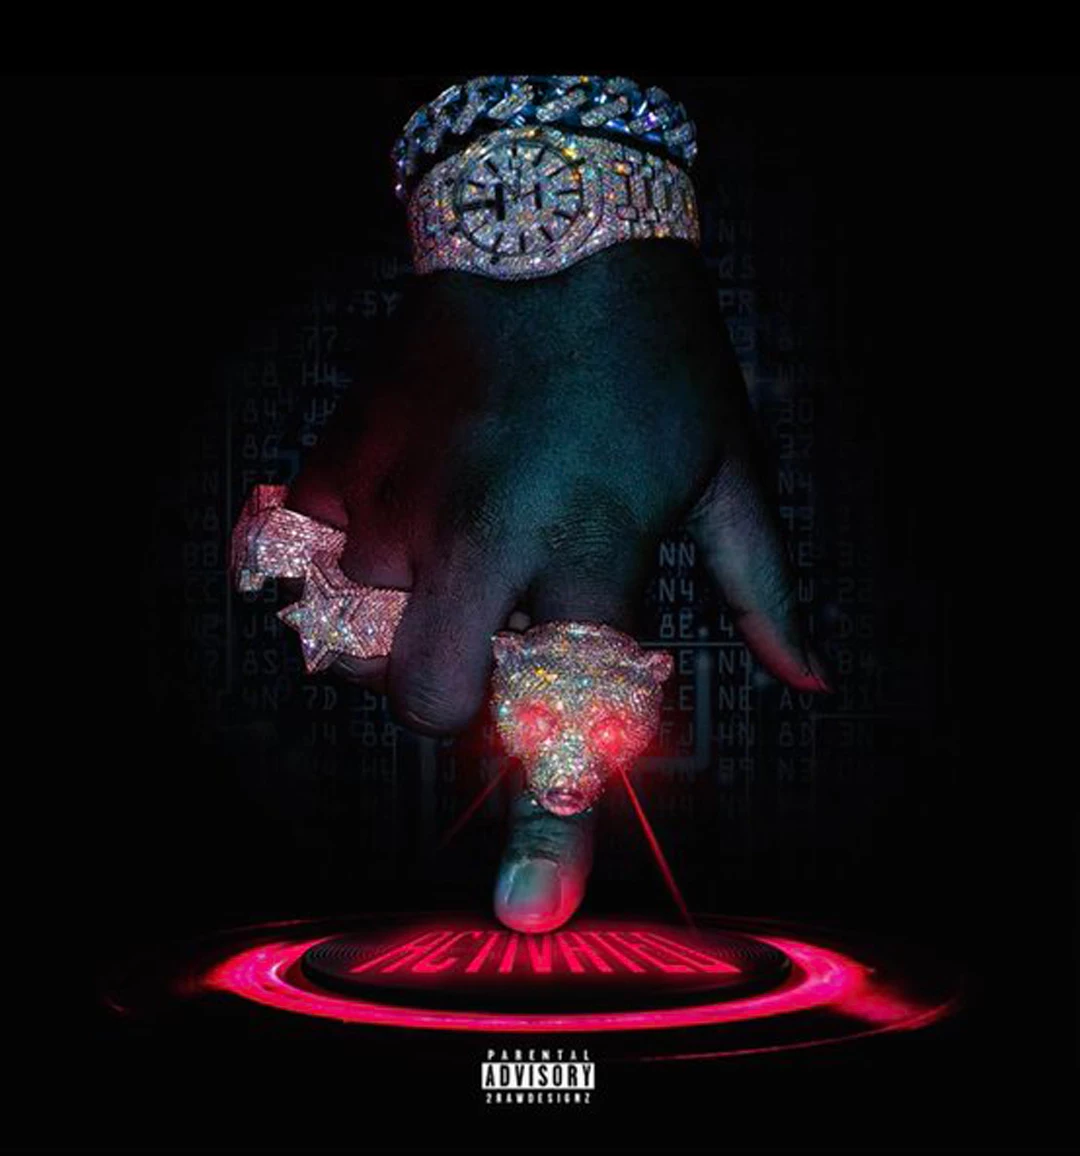 Tee-Grizzley-Activated-Cover-Full1.jpg